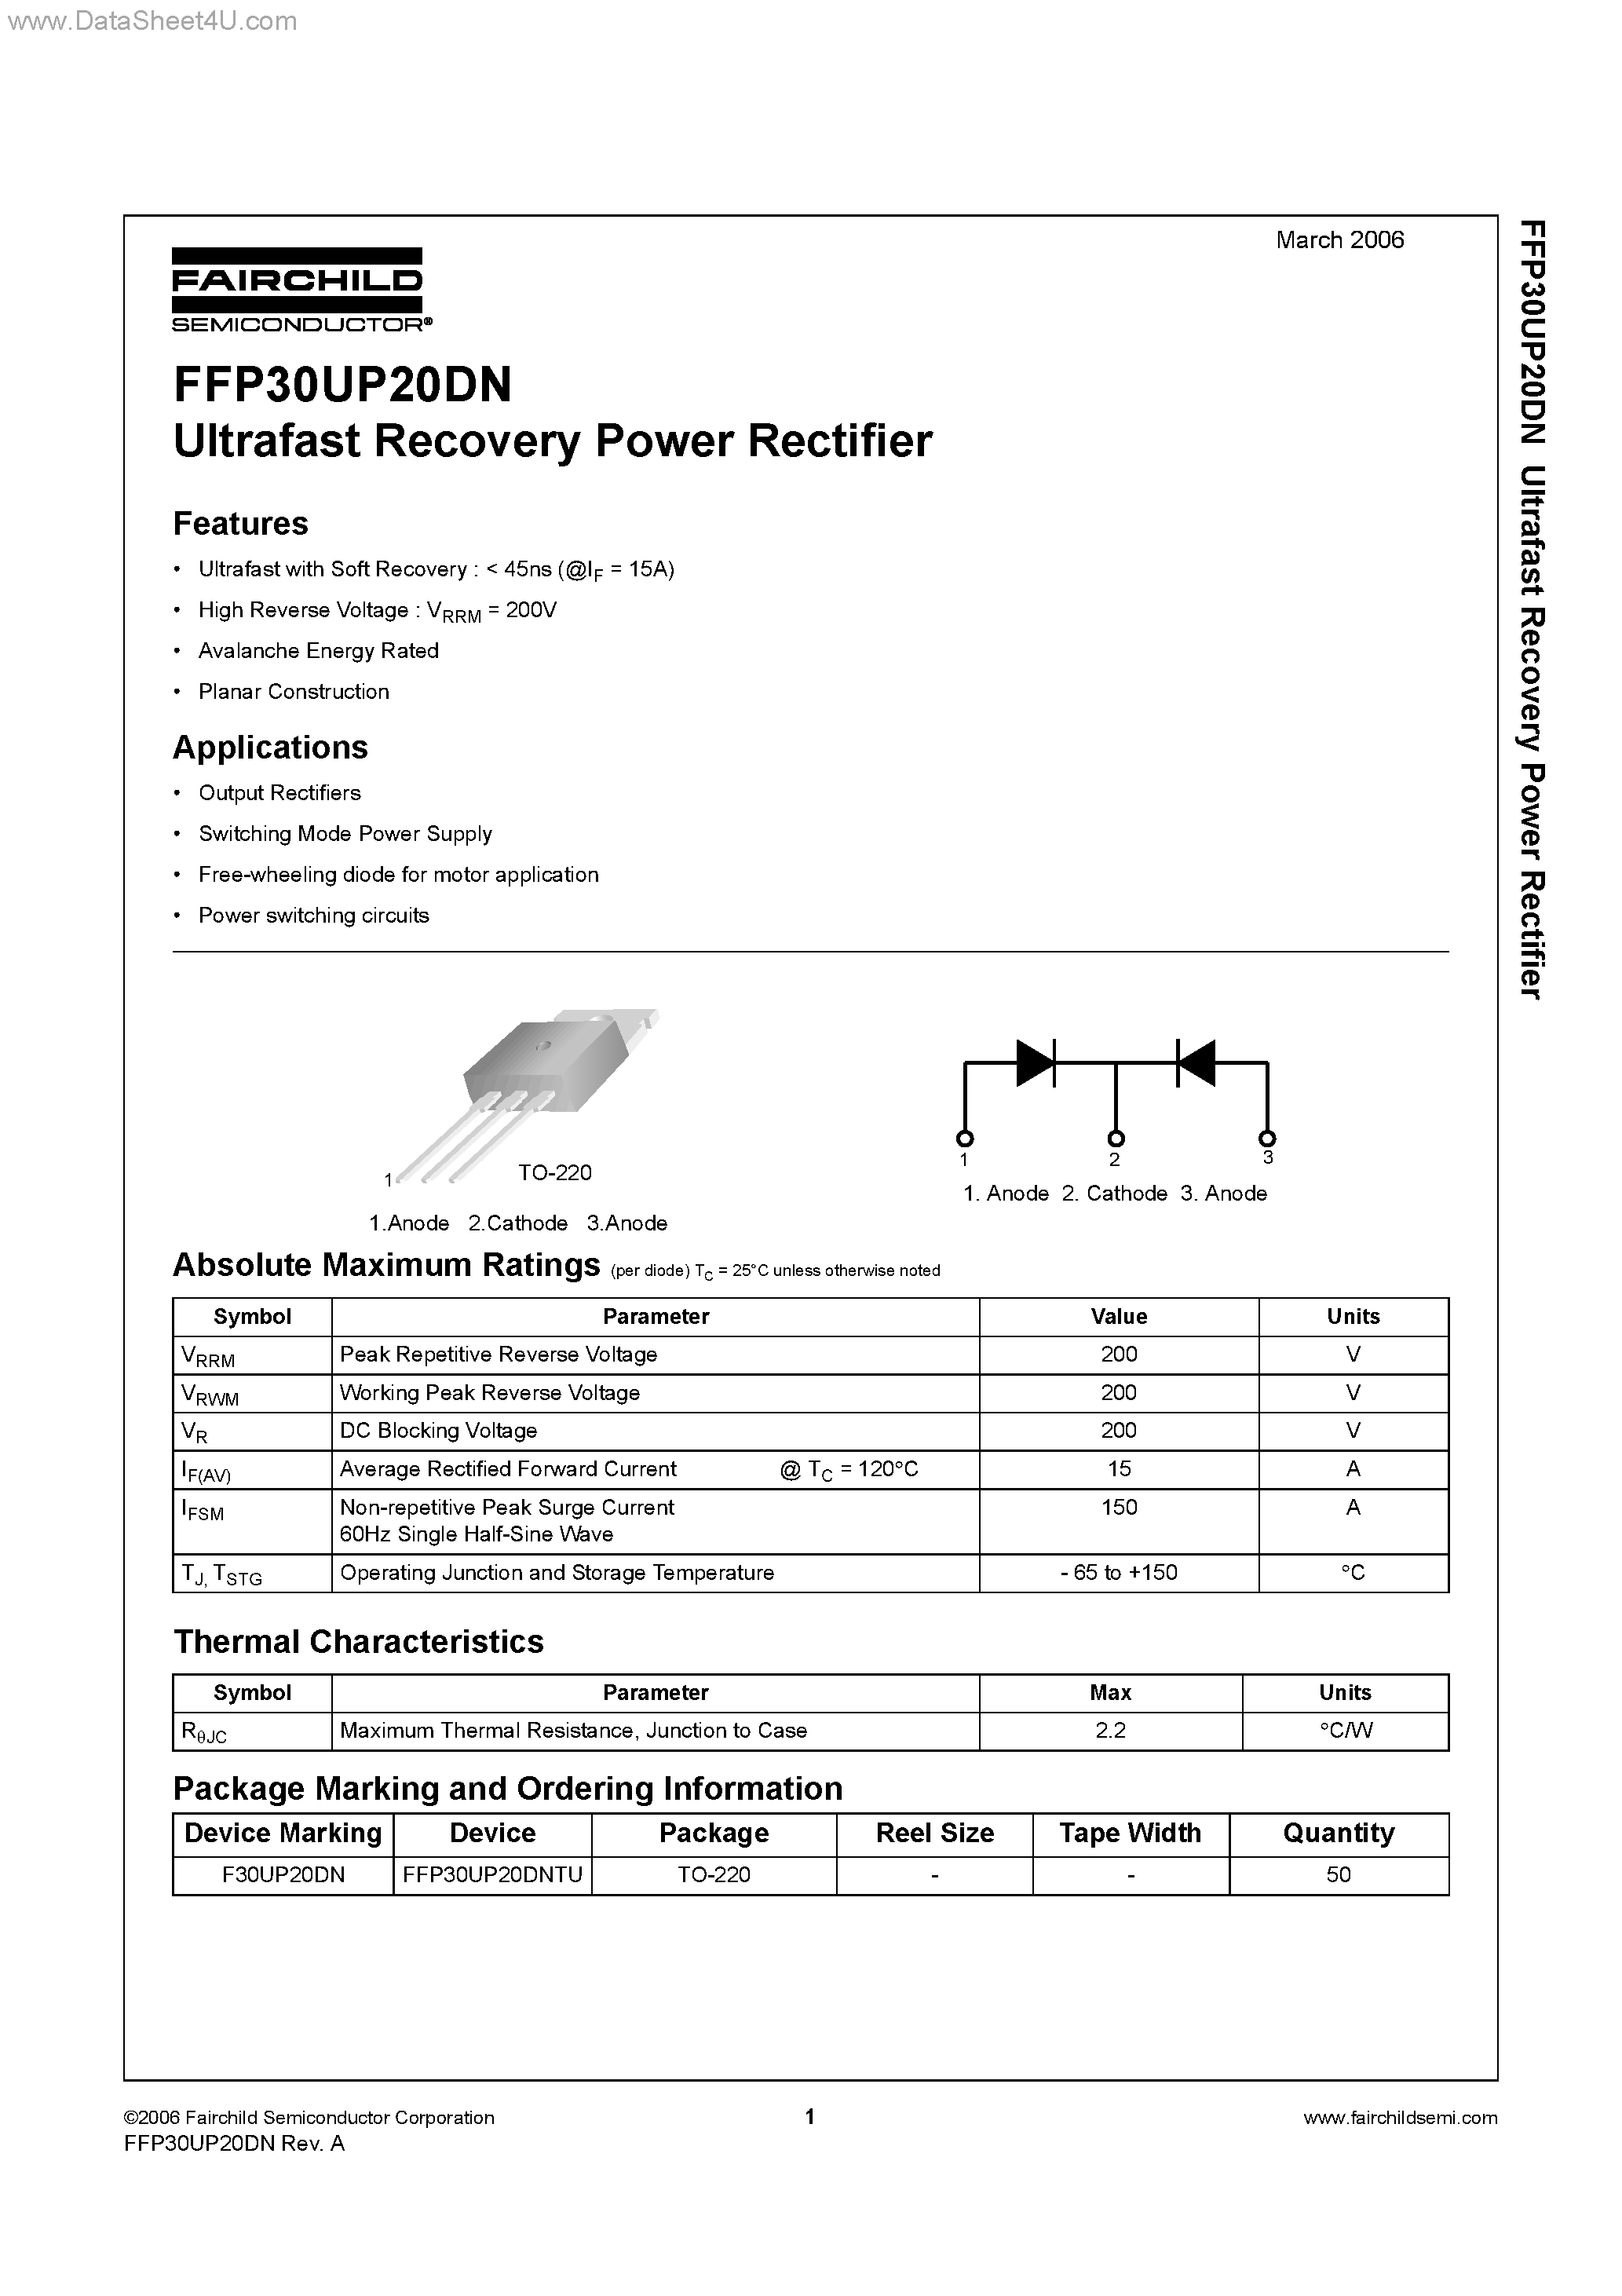 Даташит FFP30UP20DN - Ultrafast Recovery Power Rectifier страница 1